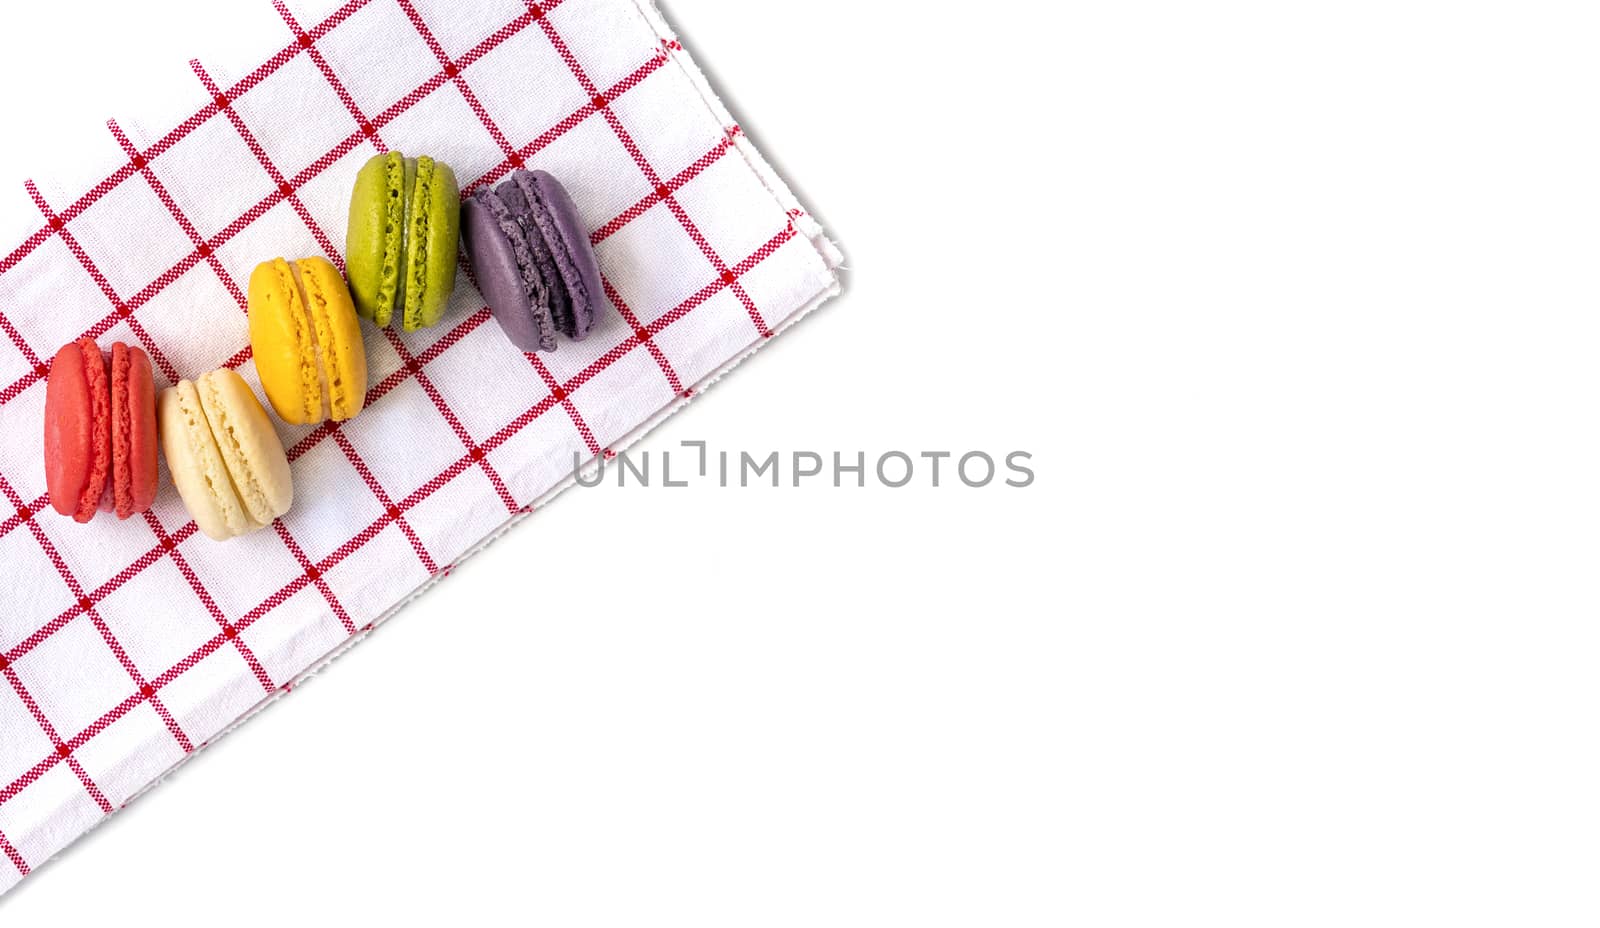 Colorful macaroons on red and white cotton cloth. Isolated on whire background.